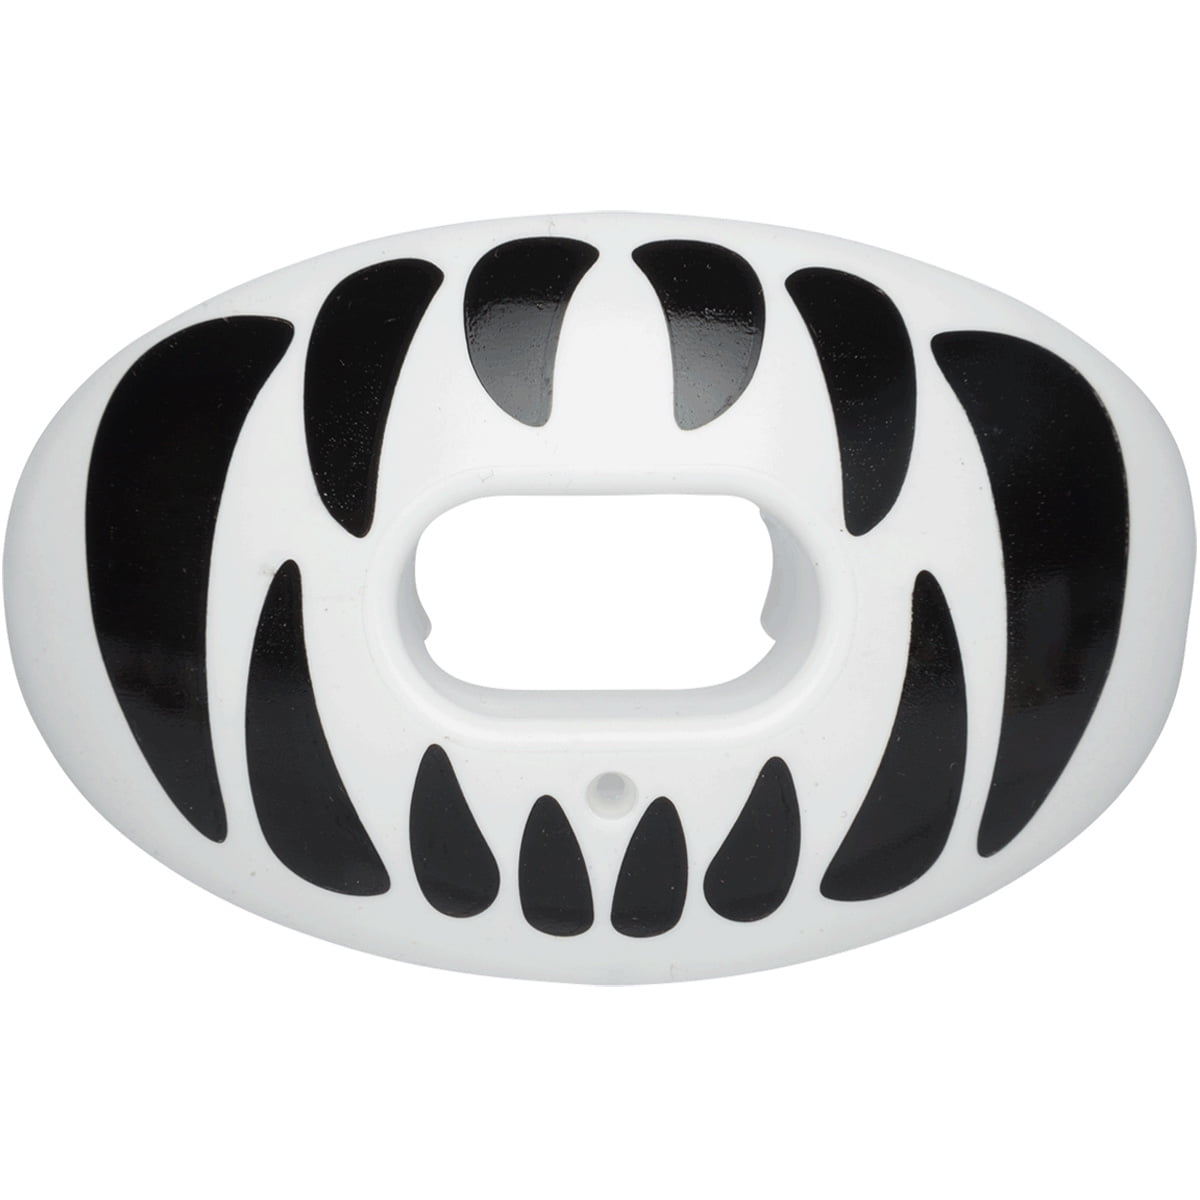 Details about   NCAA Alabama Crimson Tide Oxygen Lip Protector Mouth Guard White 